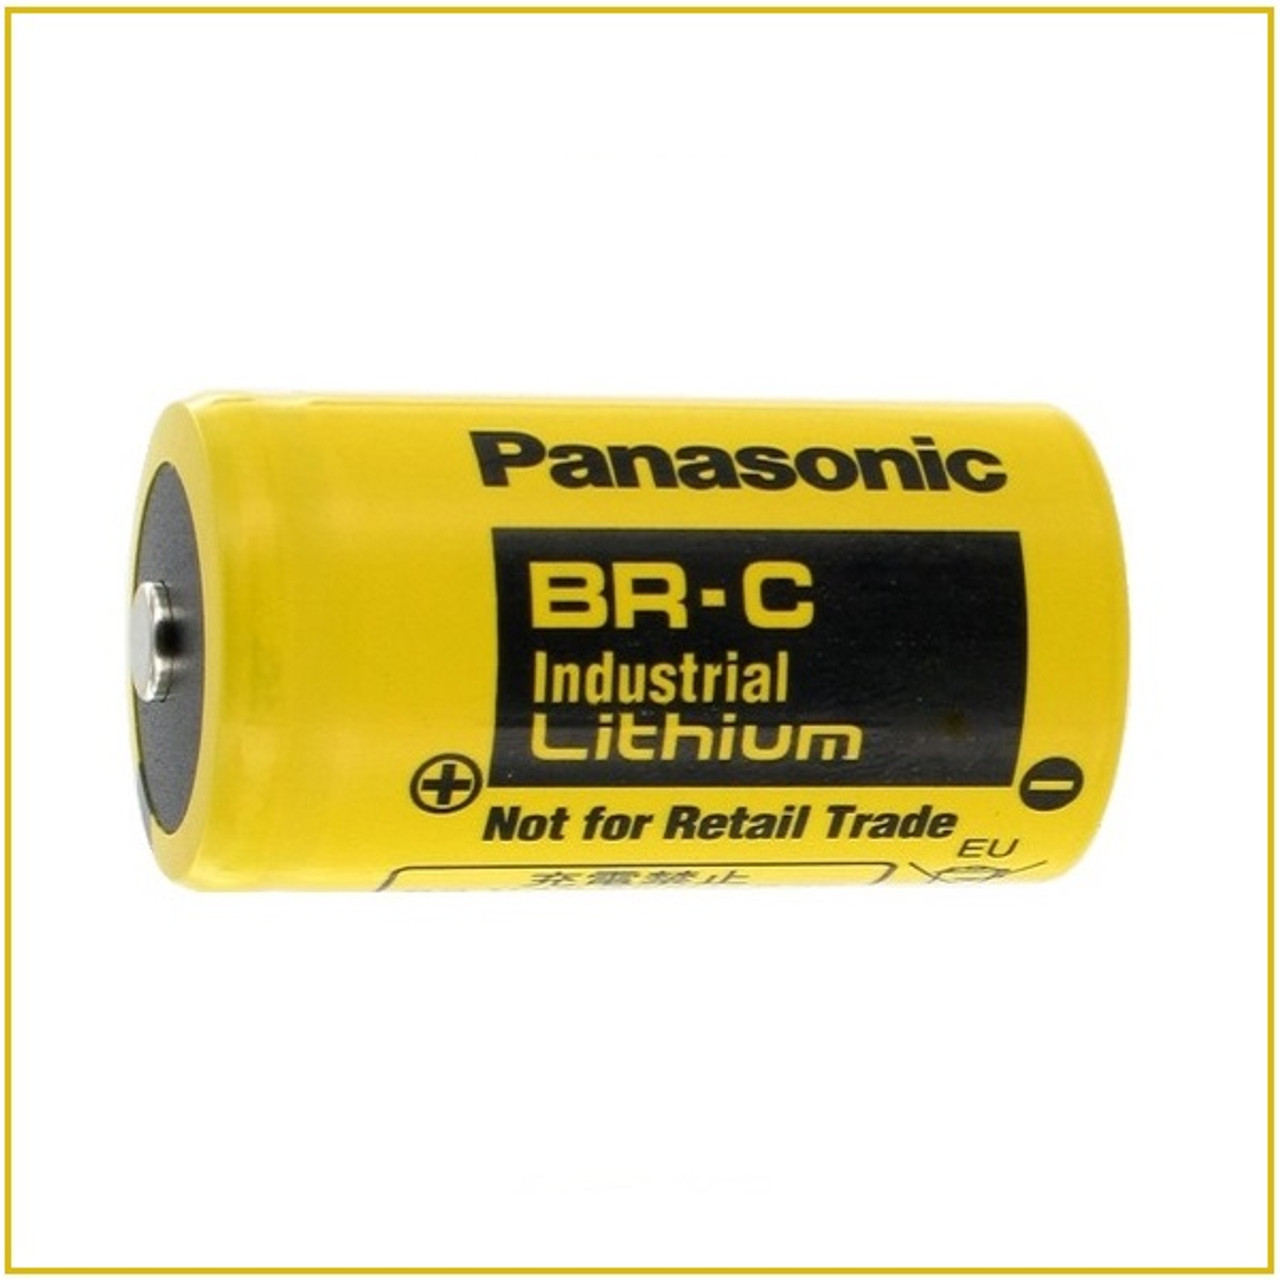 Titus C Size 3.6V ER26500 Lithium Battery - 2 Pack + Free Shipping! 